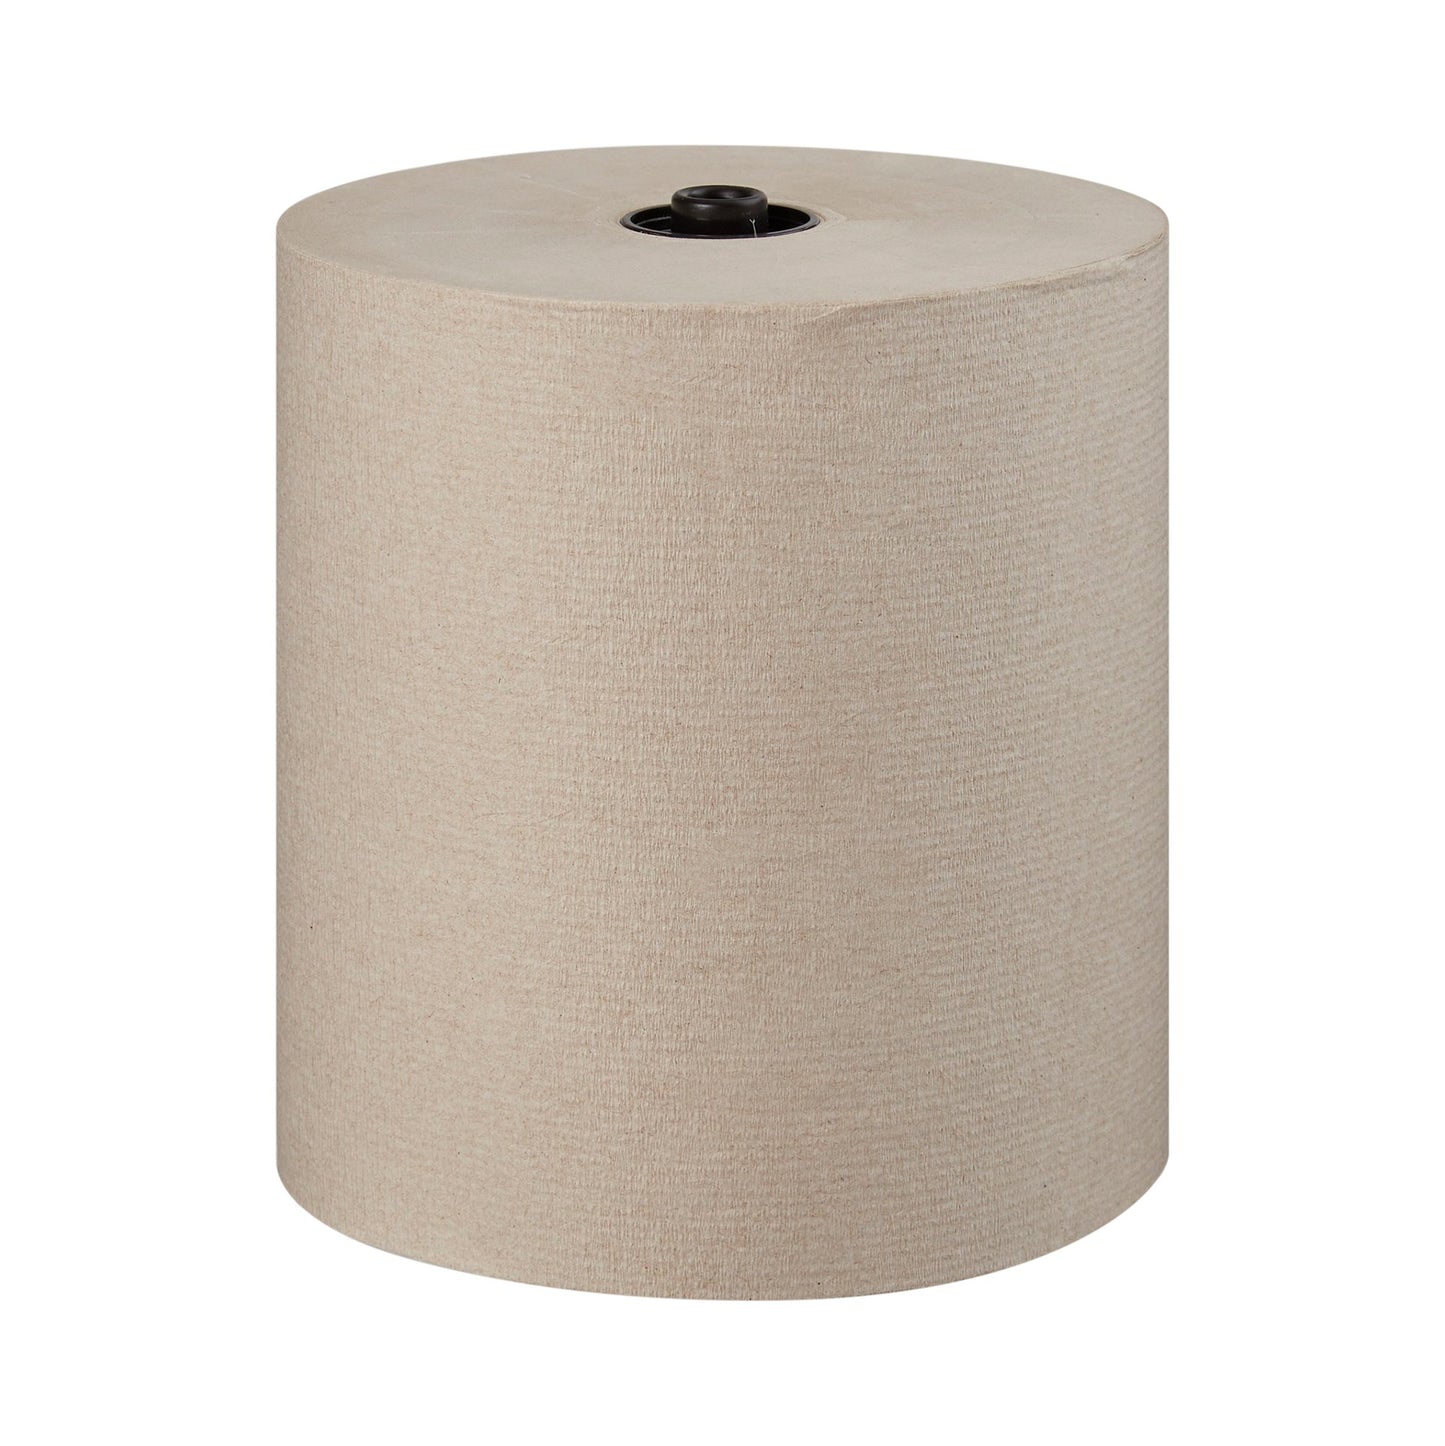 Enmotion® Brown Paper Towel, 8-1/5 Inch X 700 Foot, 6 Rolls Per Case, Sold As 6/Case Georgia 89440